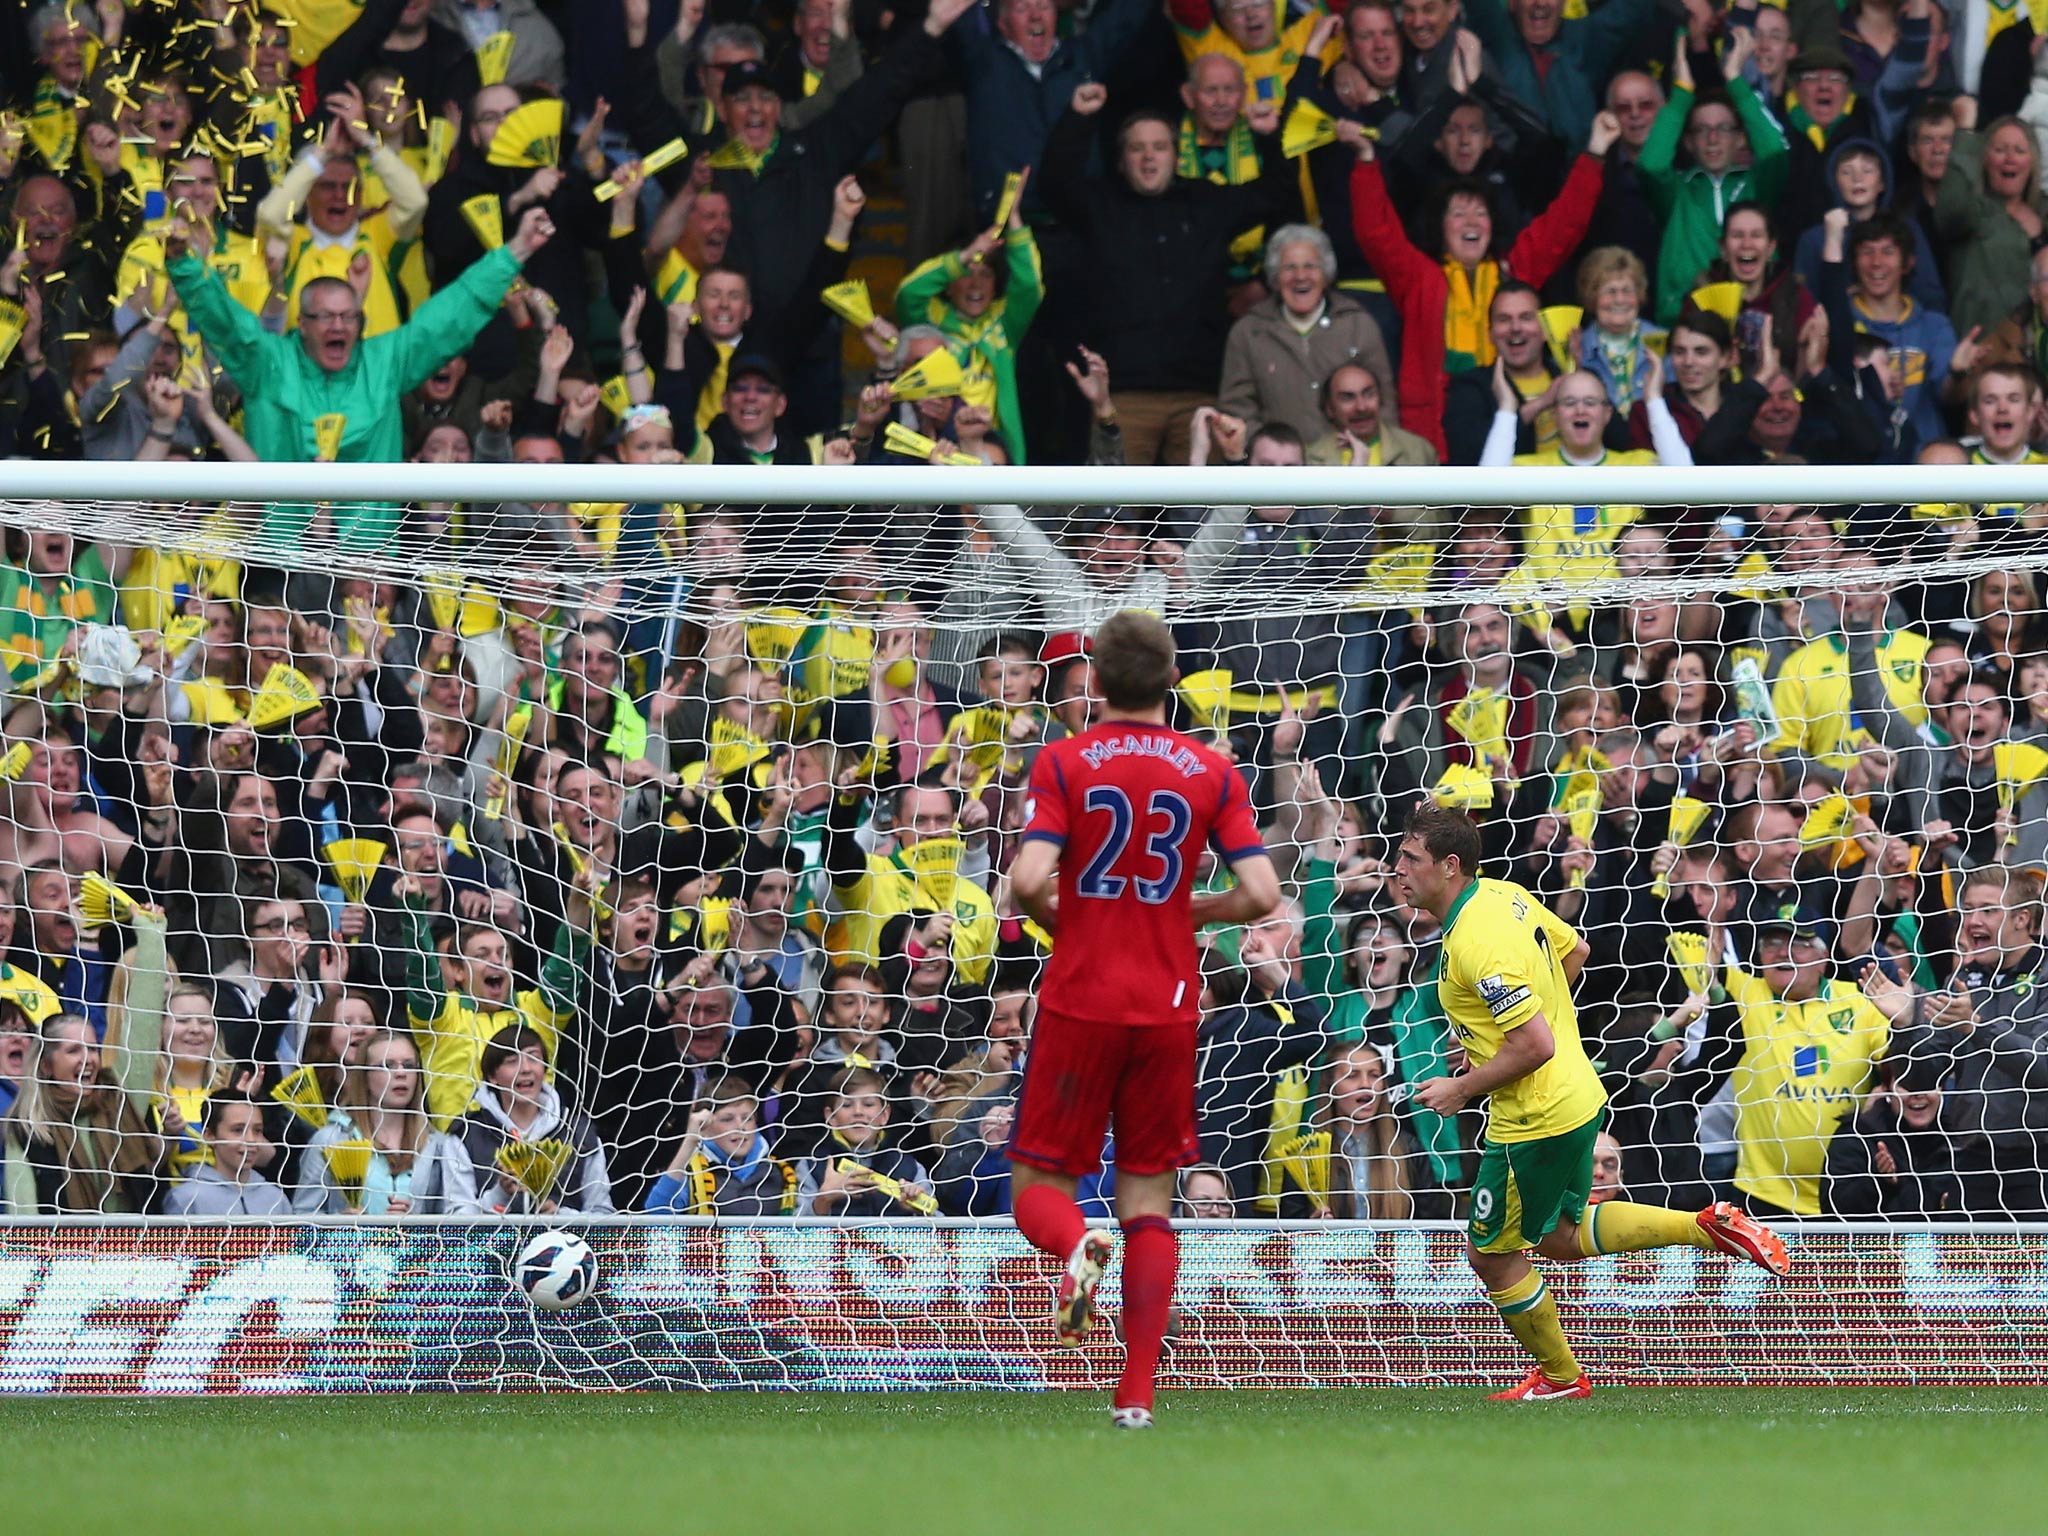 Grant Holt scores against West Brom in Norwich's 4-0 win